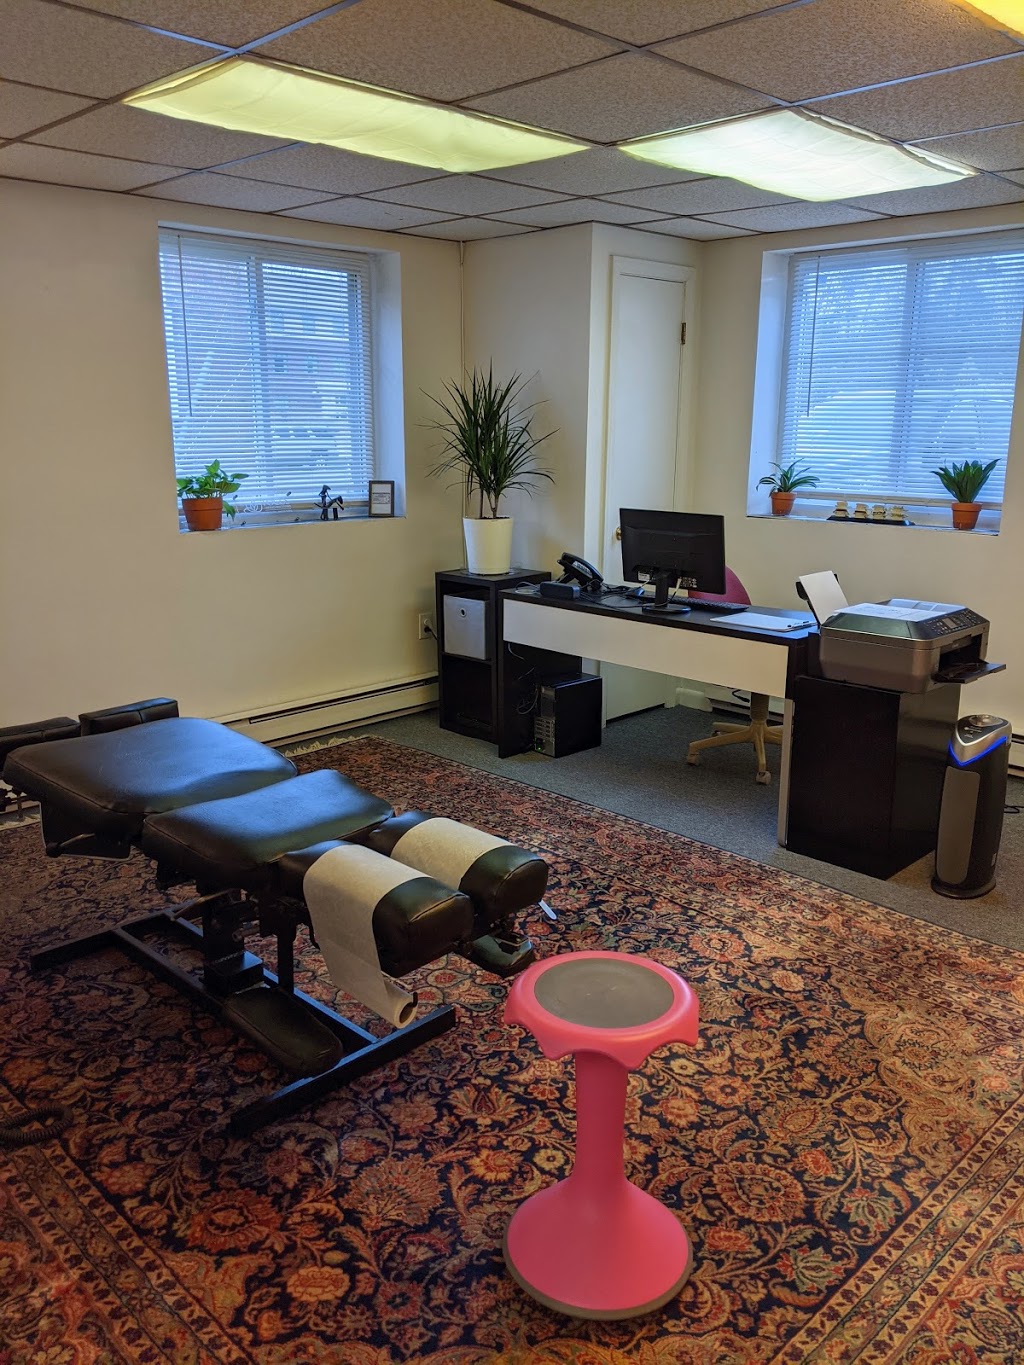 Back In Balance Chiropractic | 59 Pond St A, Sharon, MA 02067 | Phone: (781) 806-5745